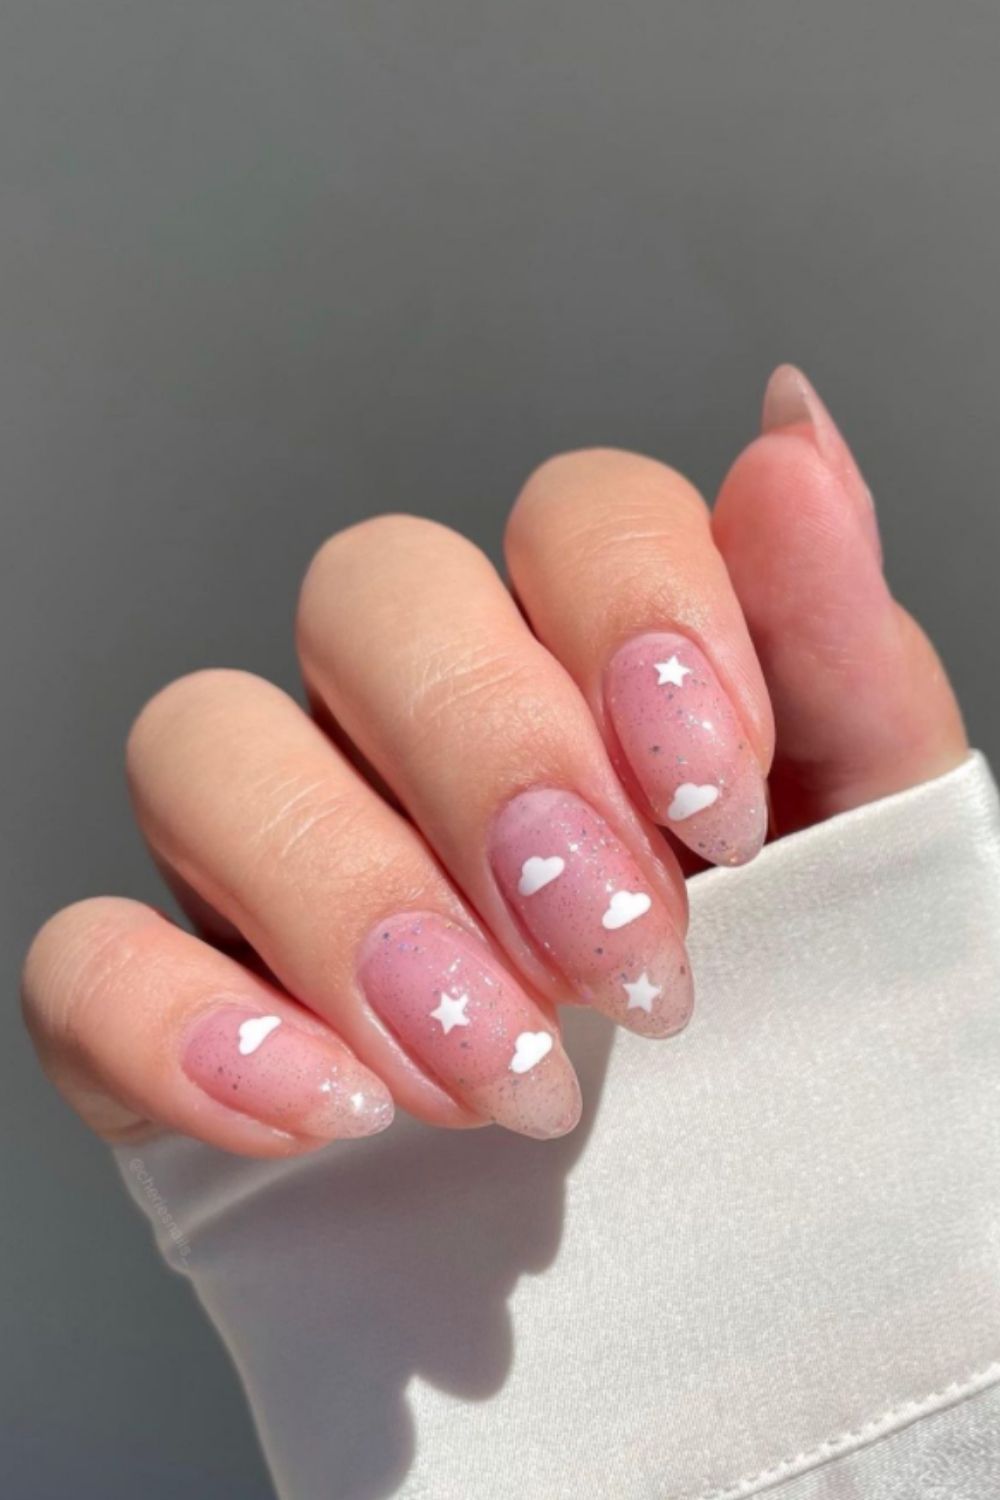 Glitter almond nail ideas with white clouds and stars